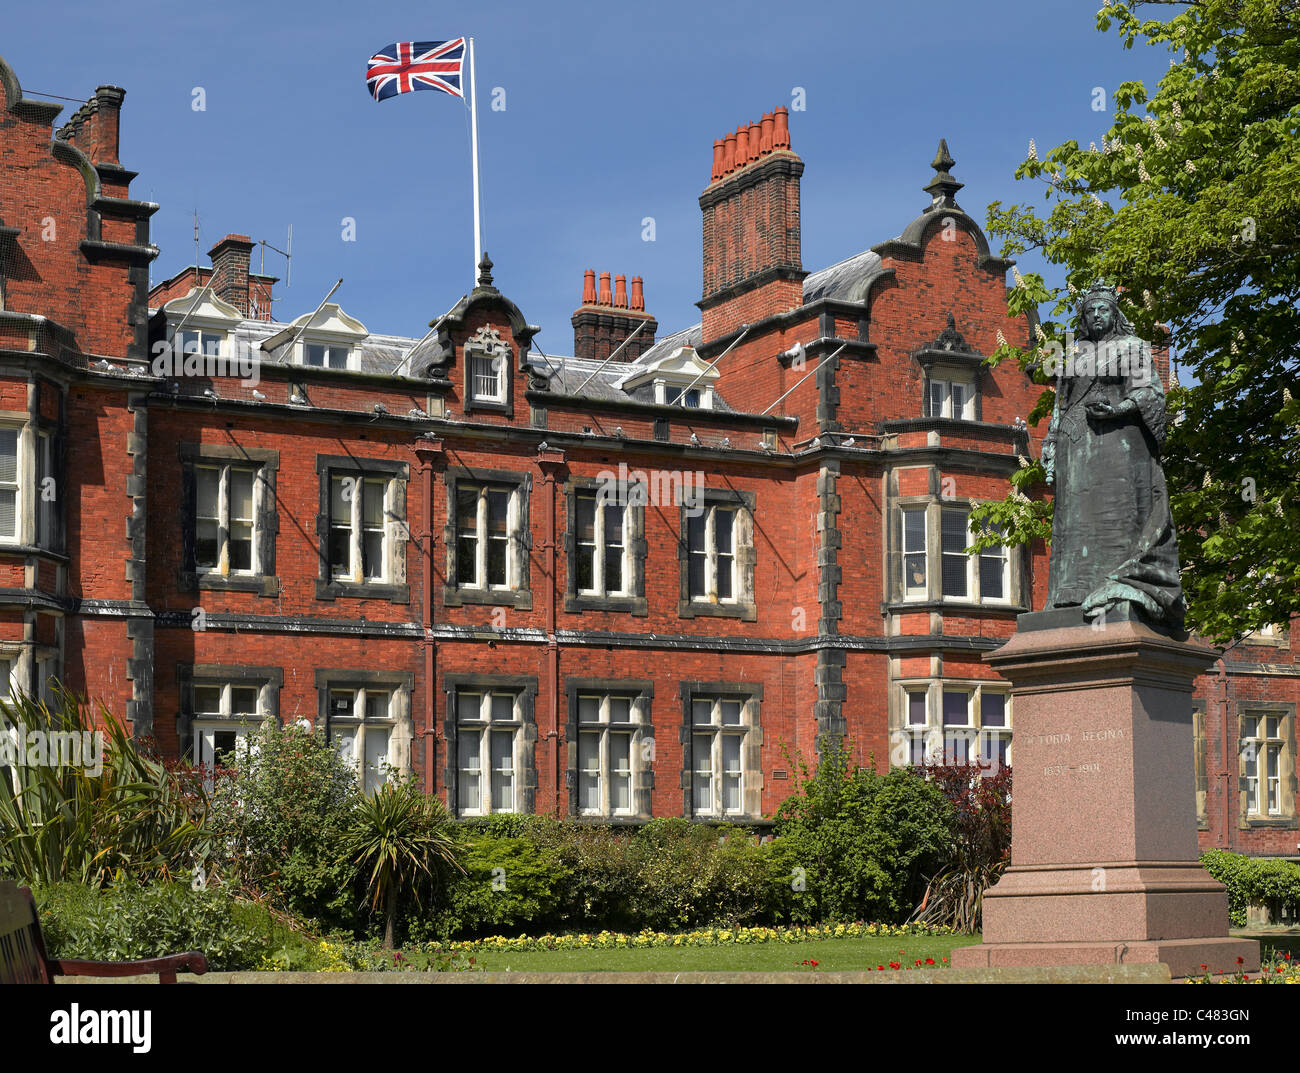 Statue of Queen Victoria and Town Hall South Bay Scarborough North Yorkshire England UK United Kingdom GB Great Britain Stock Photo